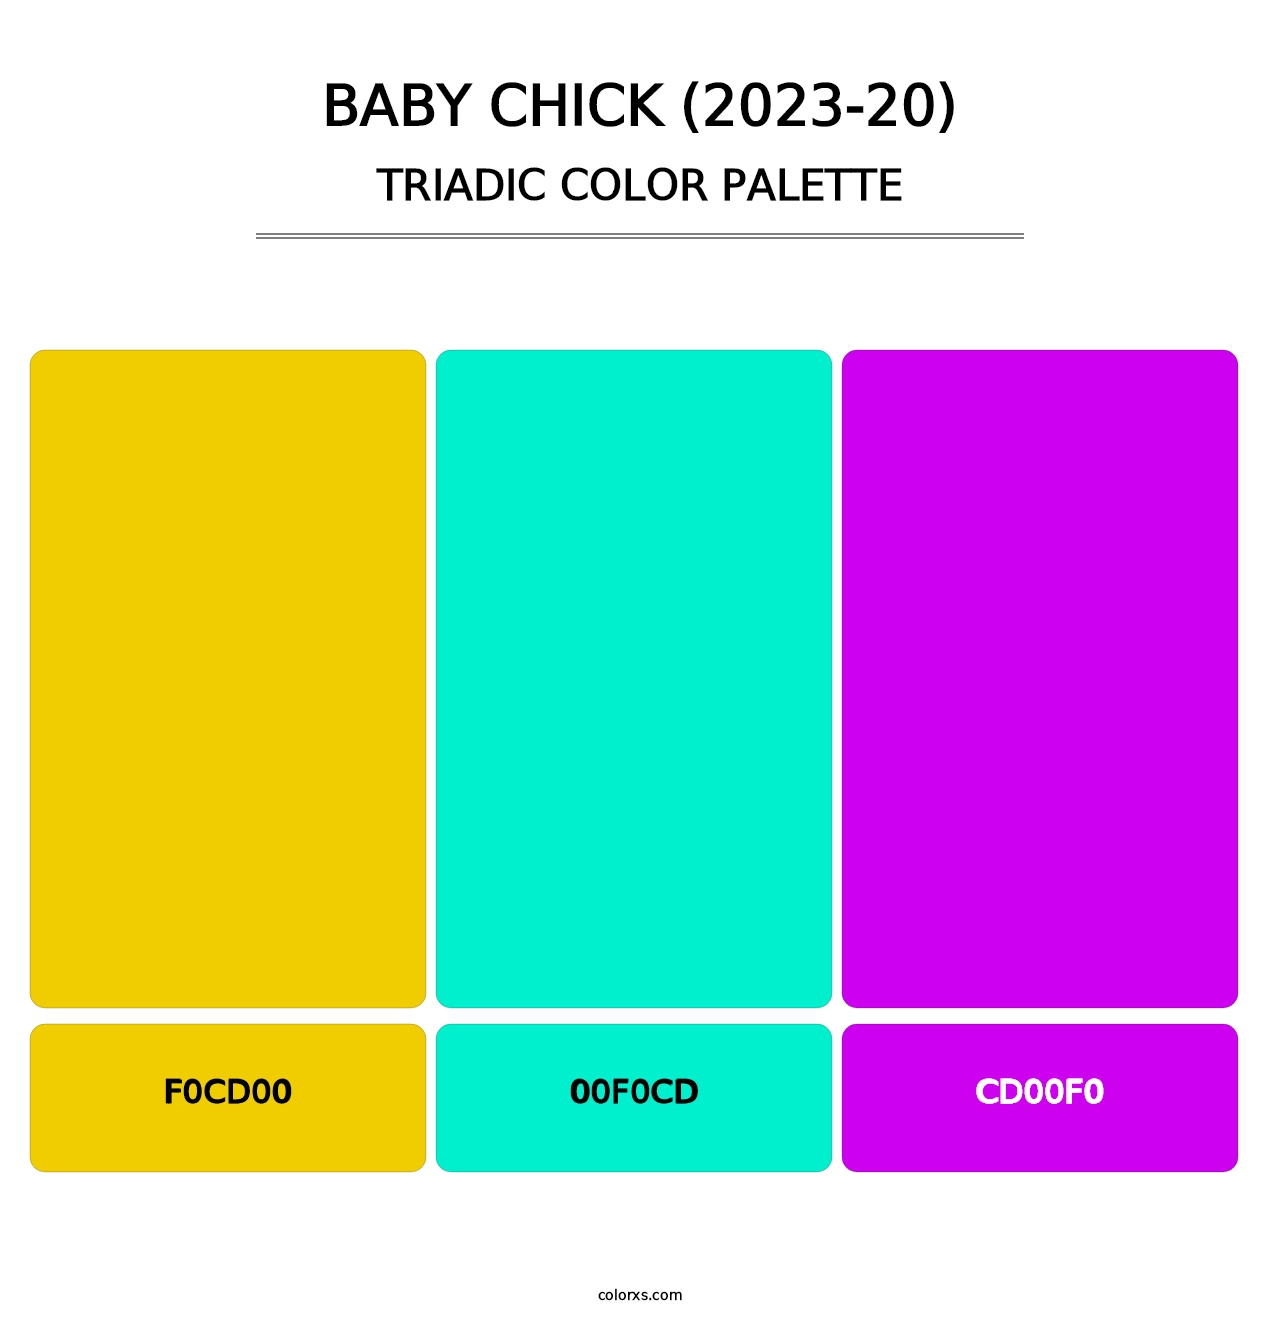 Baby Chick (2023-20) - Triadic Color Palette